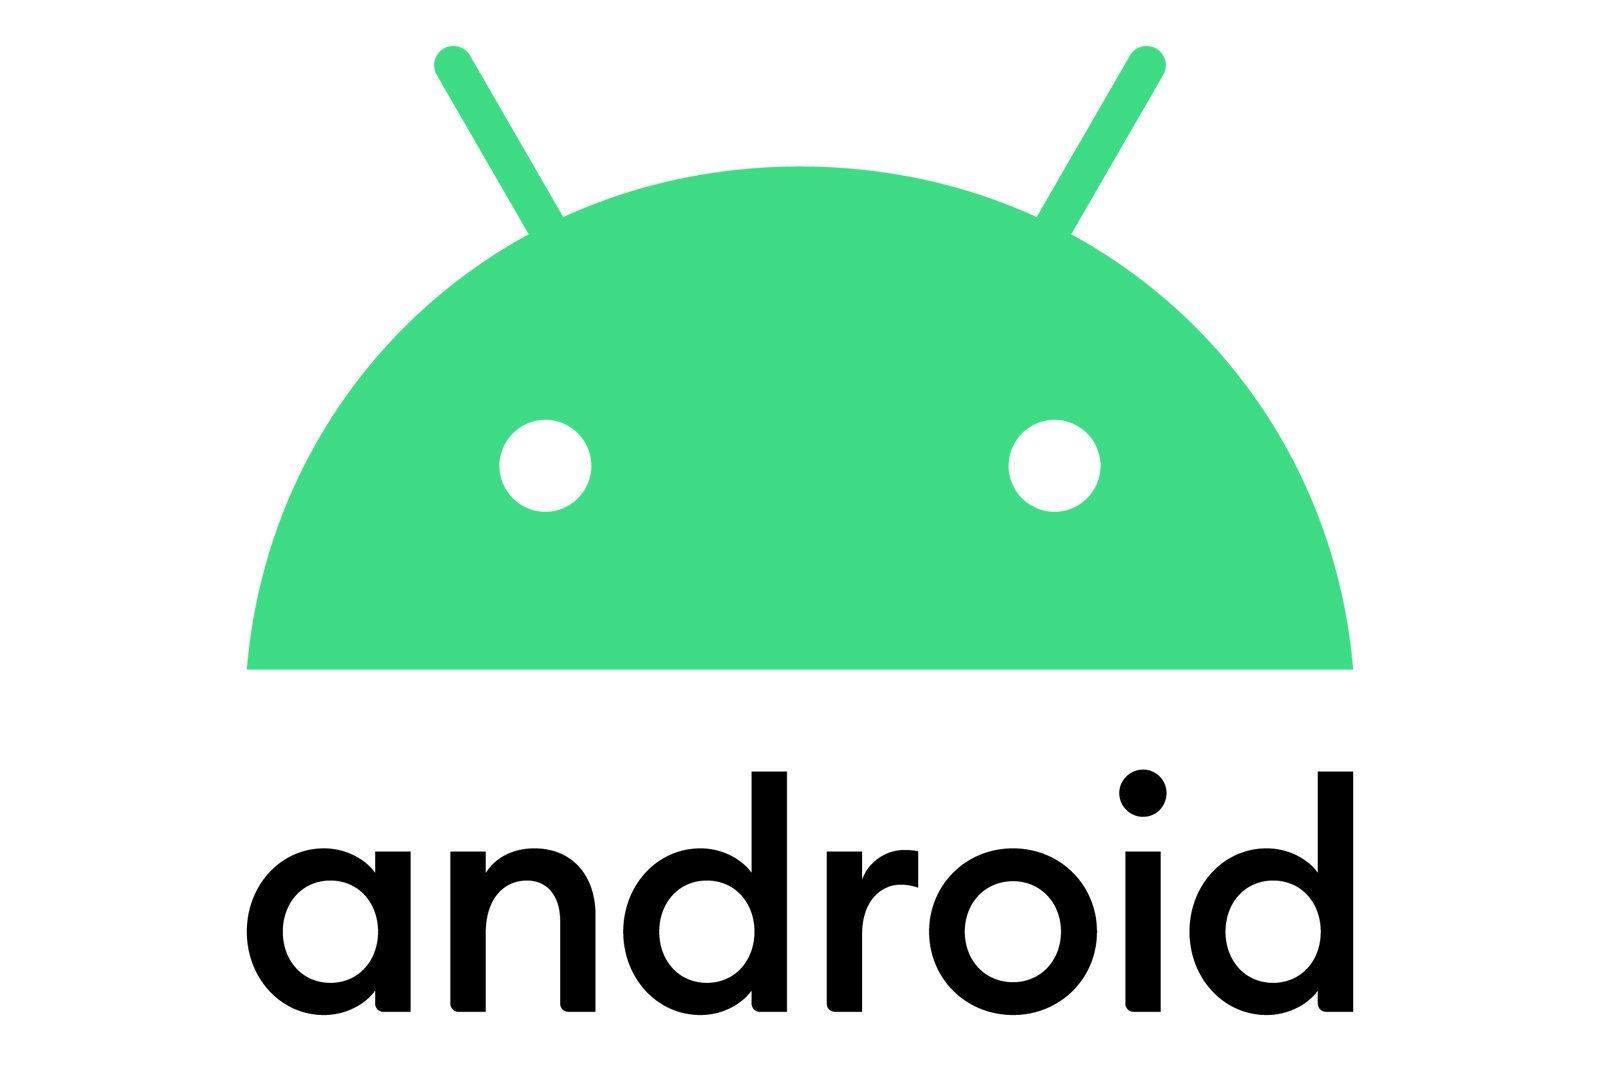 The next evolution of Android 